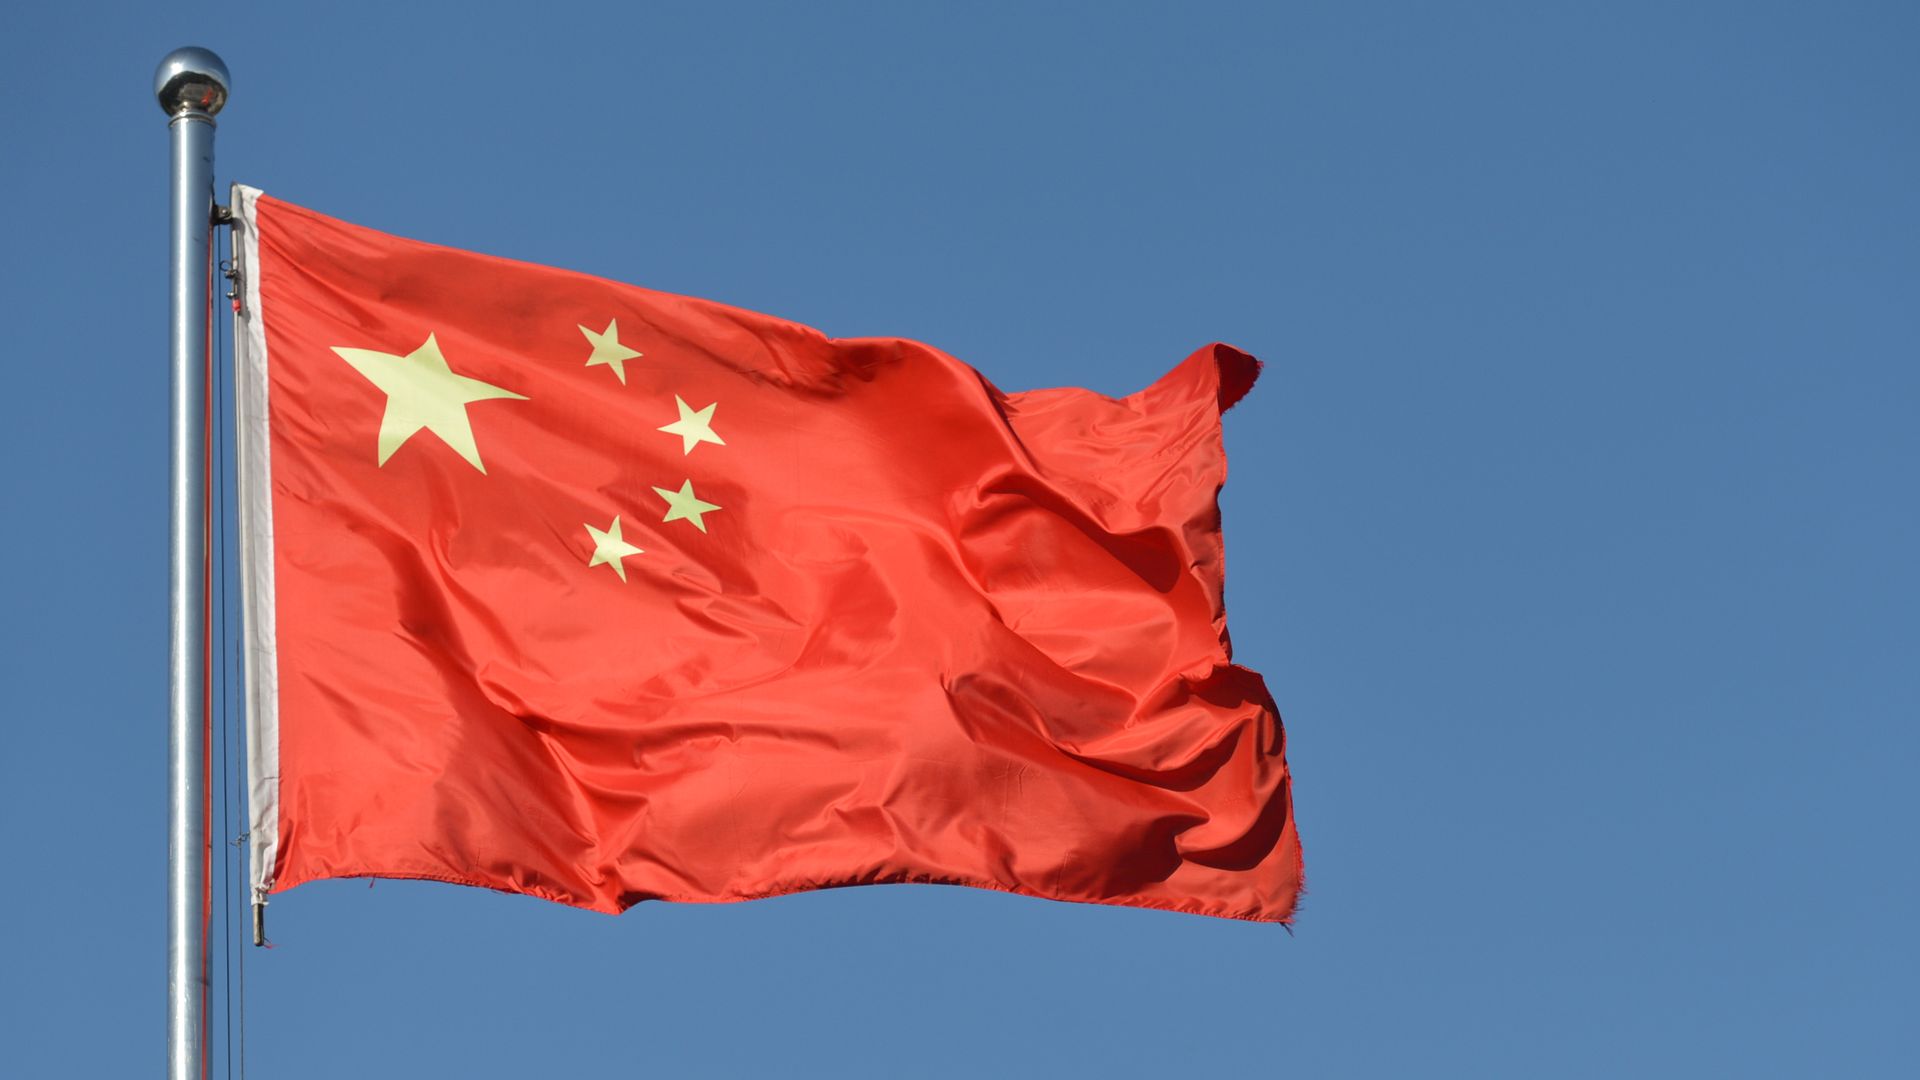 The Chinese flag.